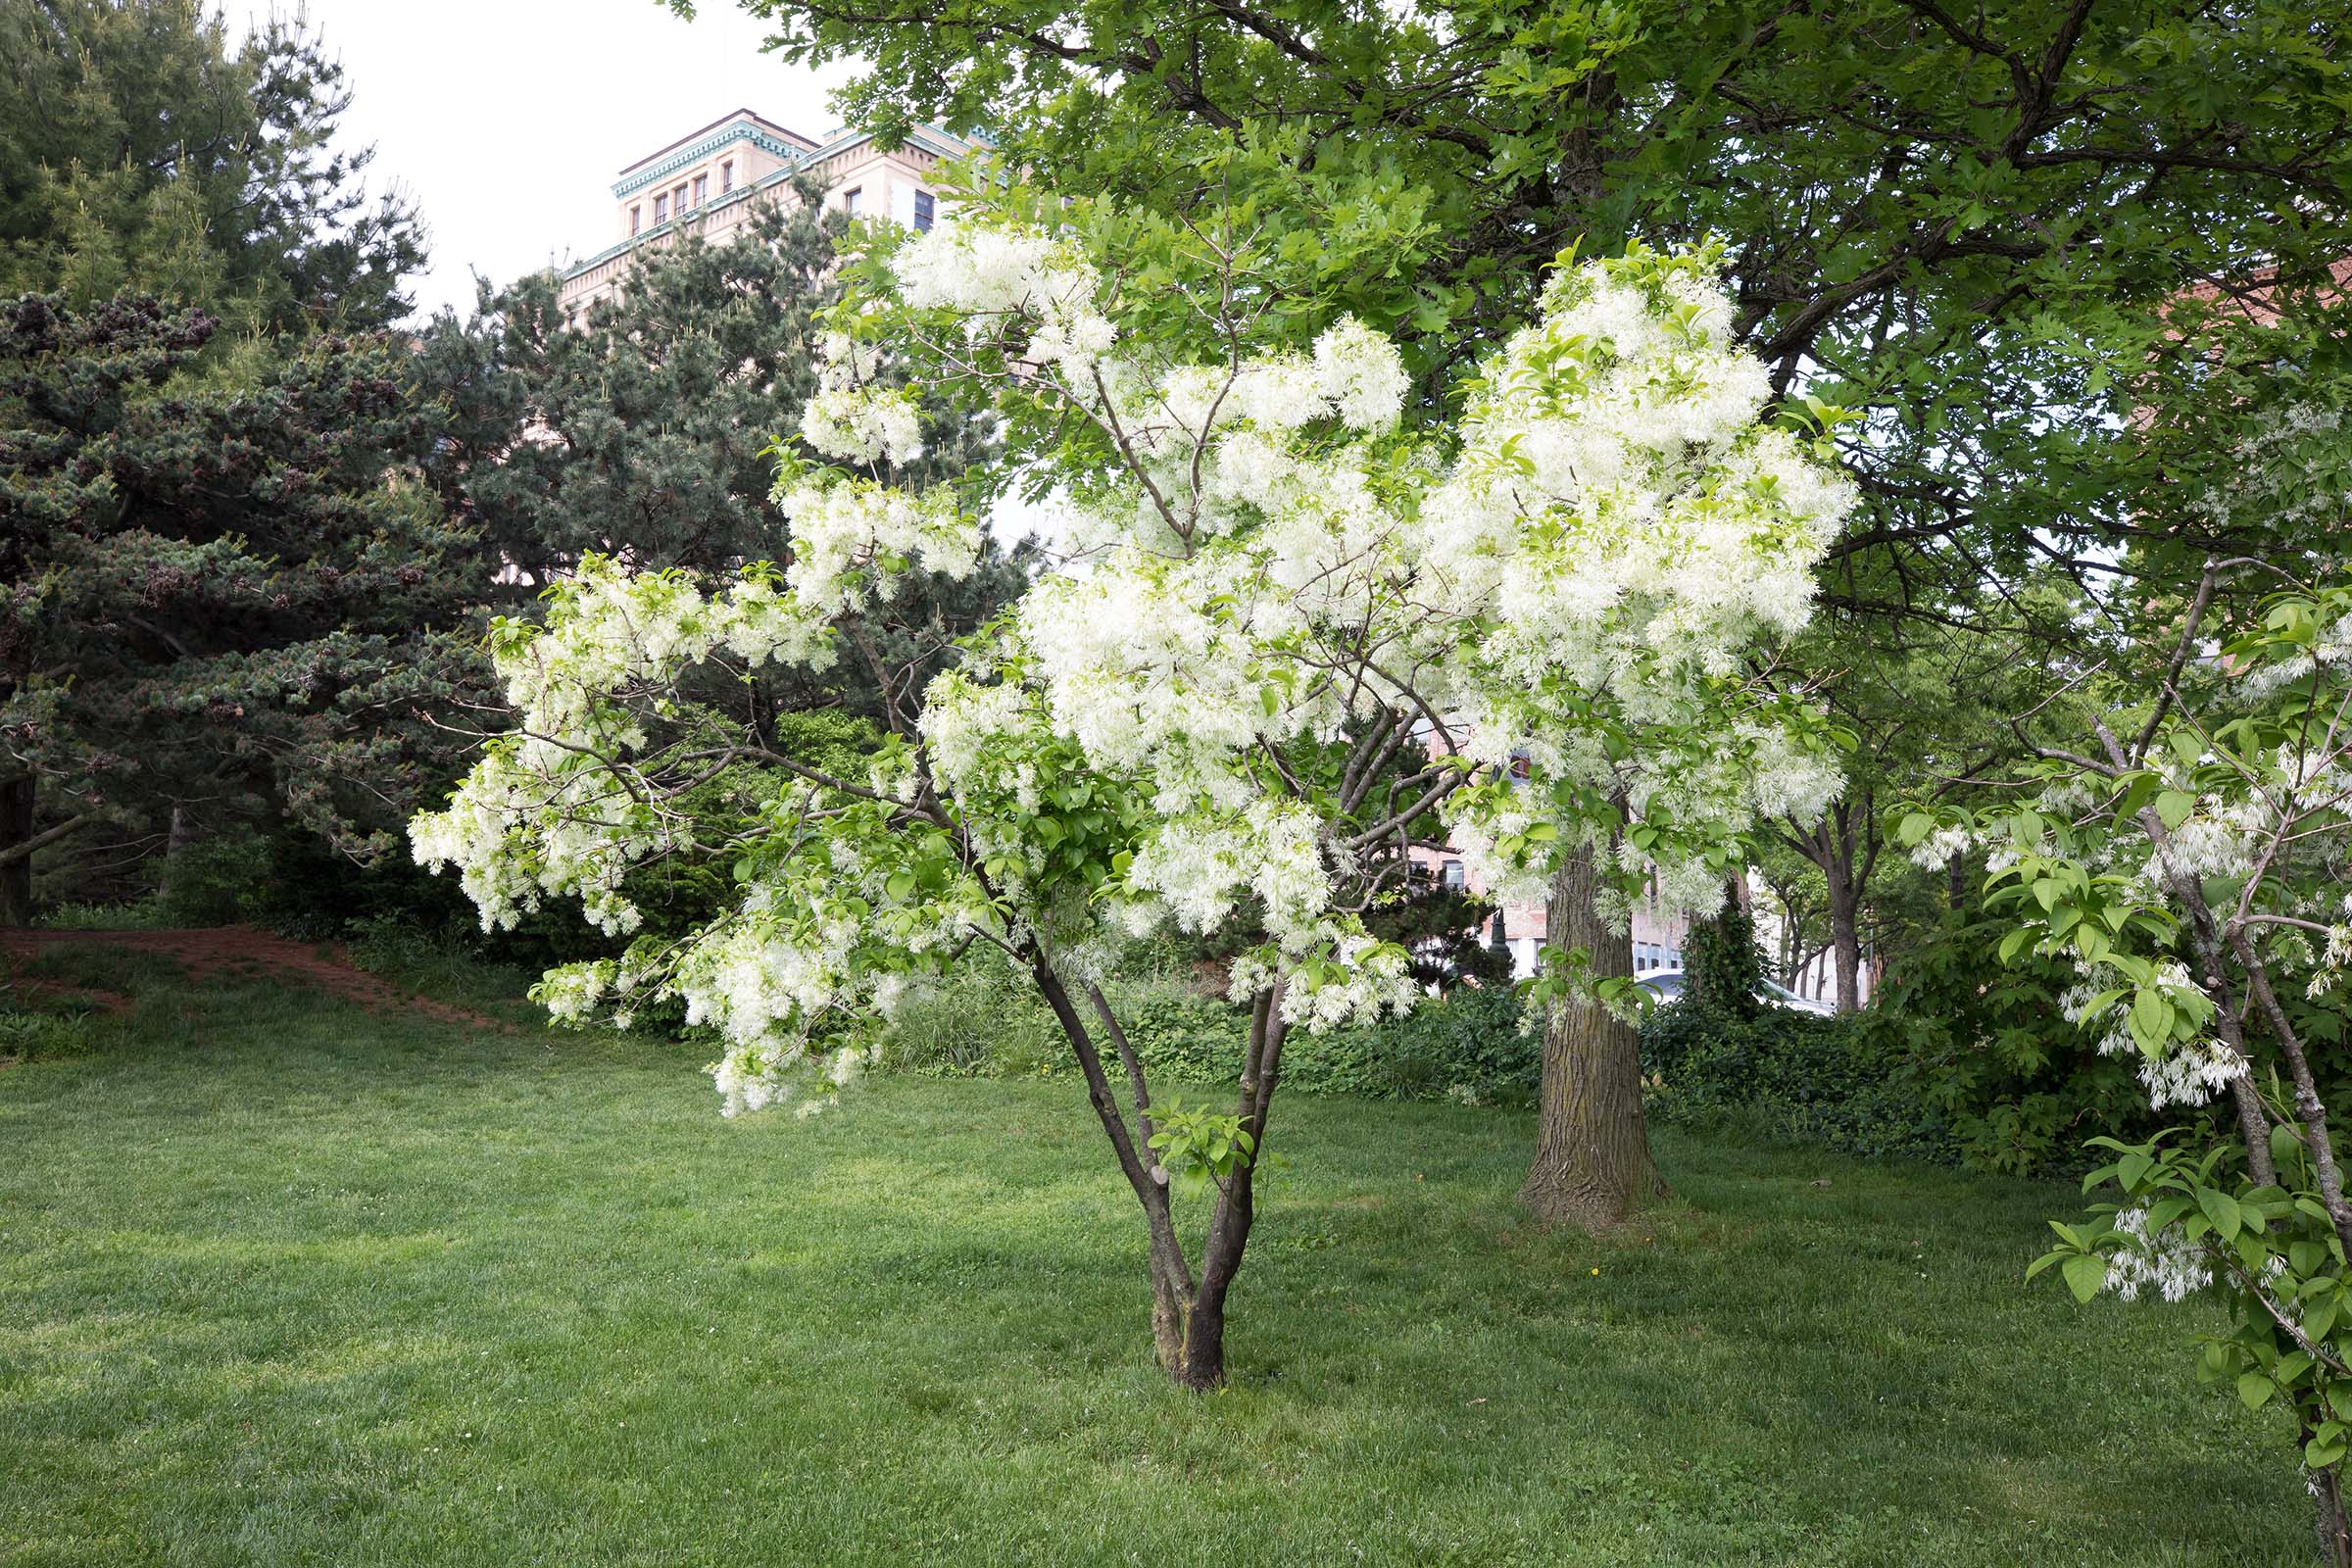 The beautiful white blossoms on the fringe trees